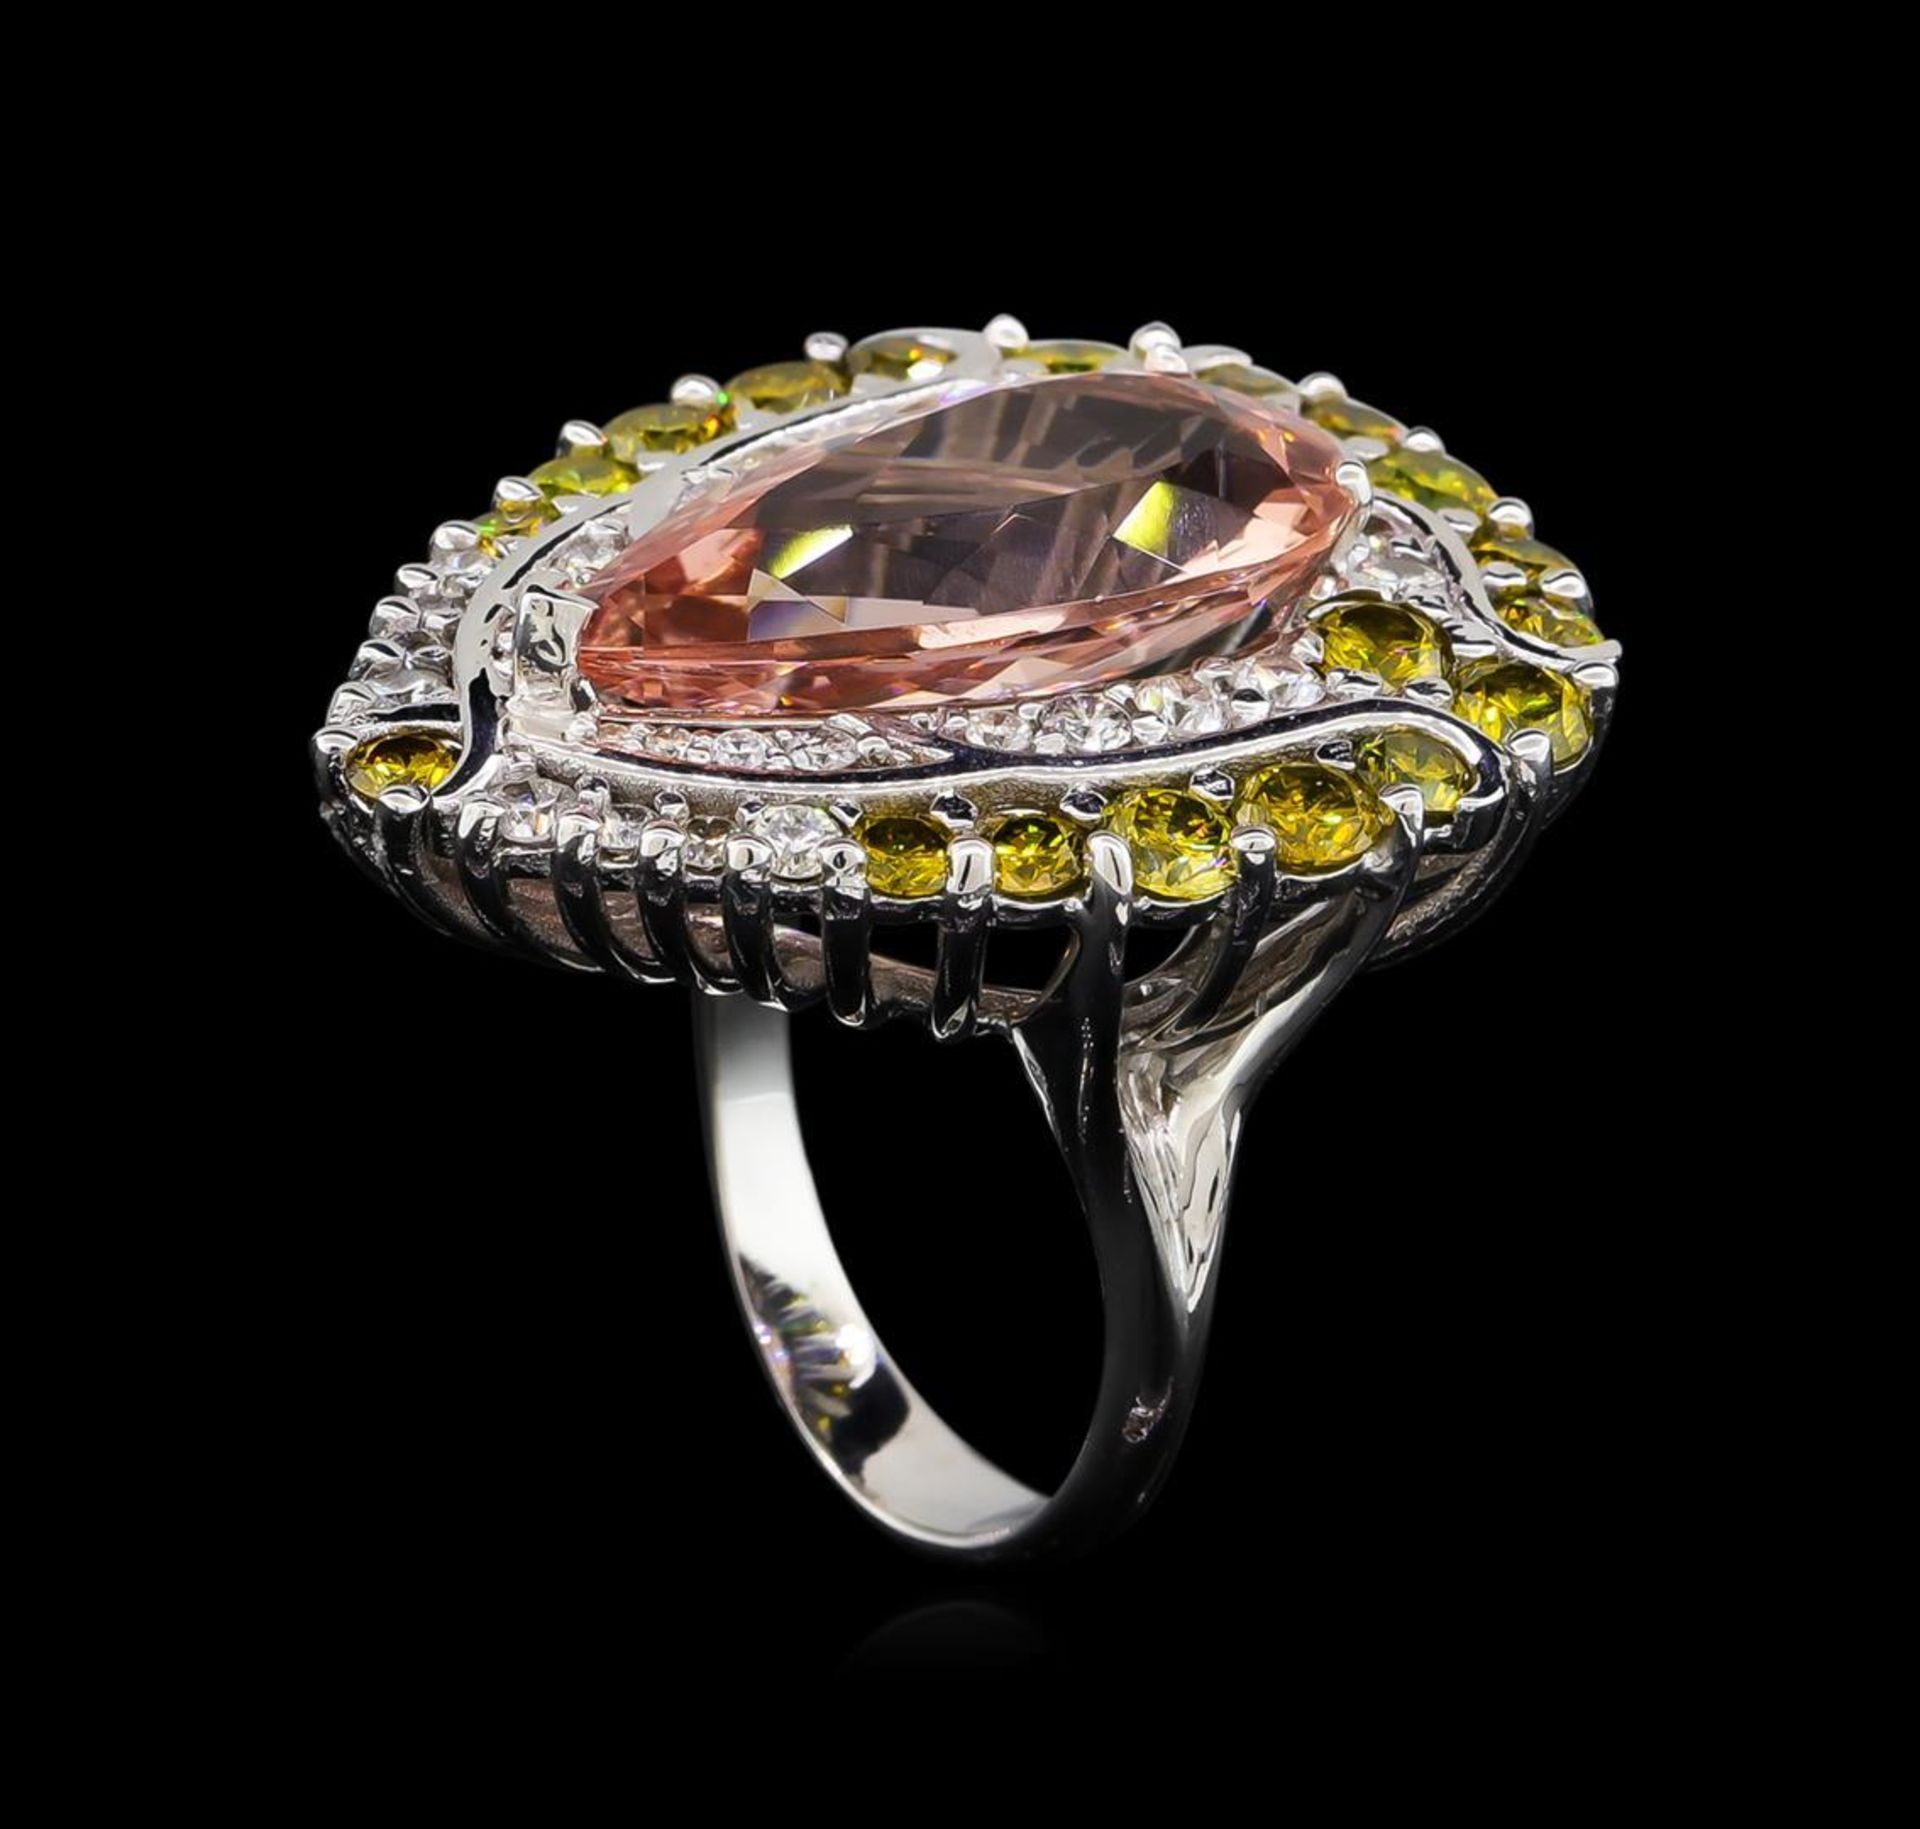 9.04 ctw Morganite and Diamond Ring - 18KT White Gold - Image 4 of 6